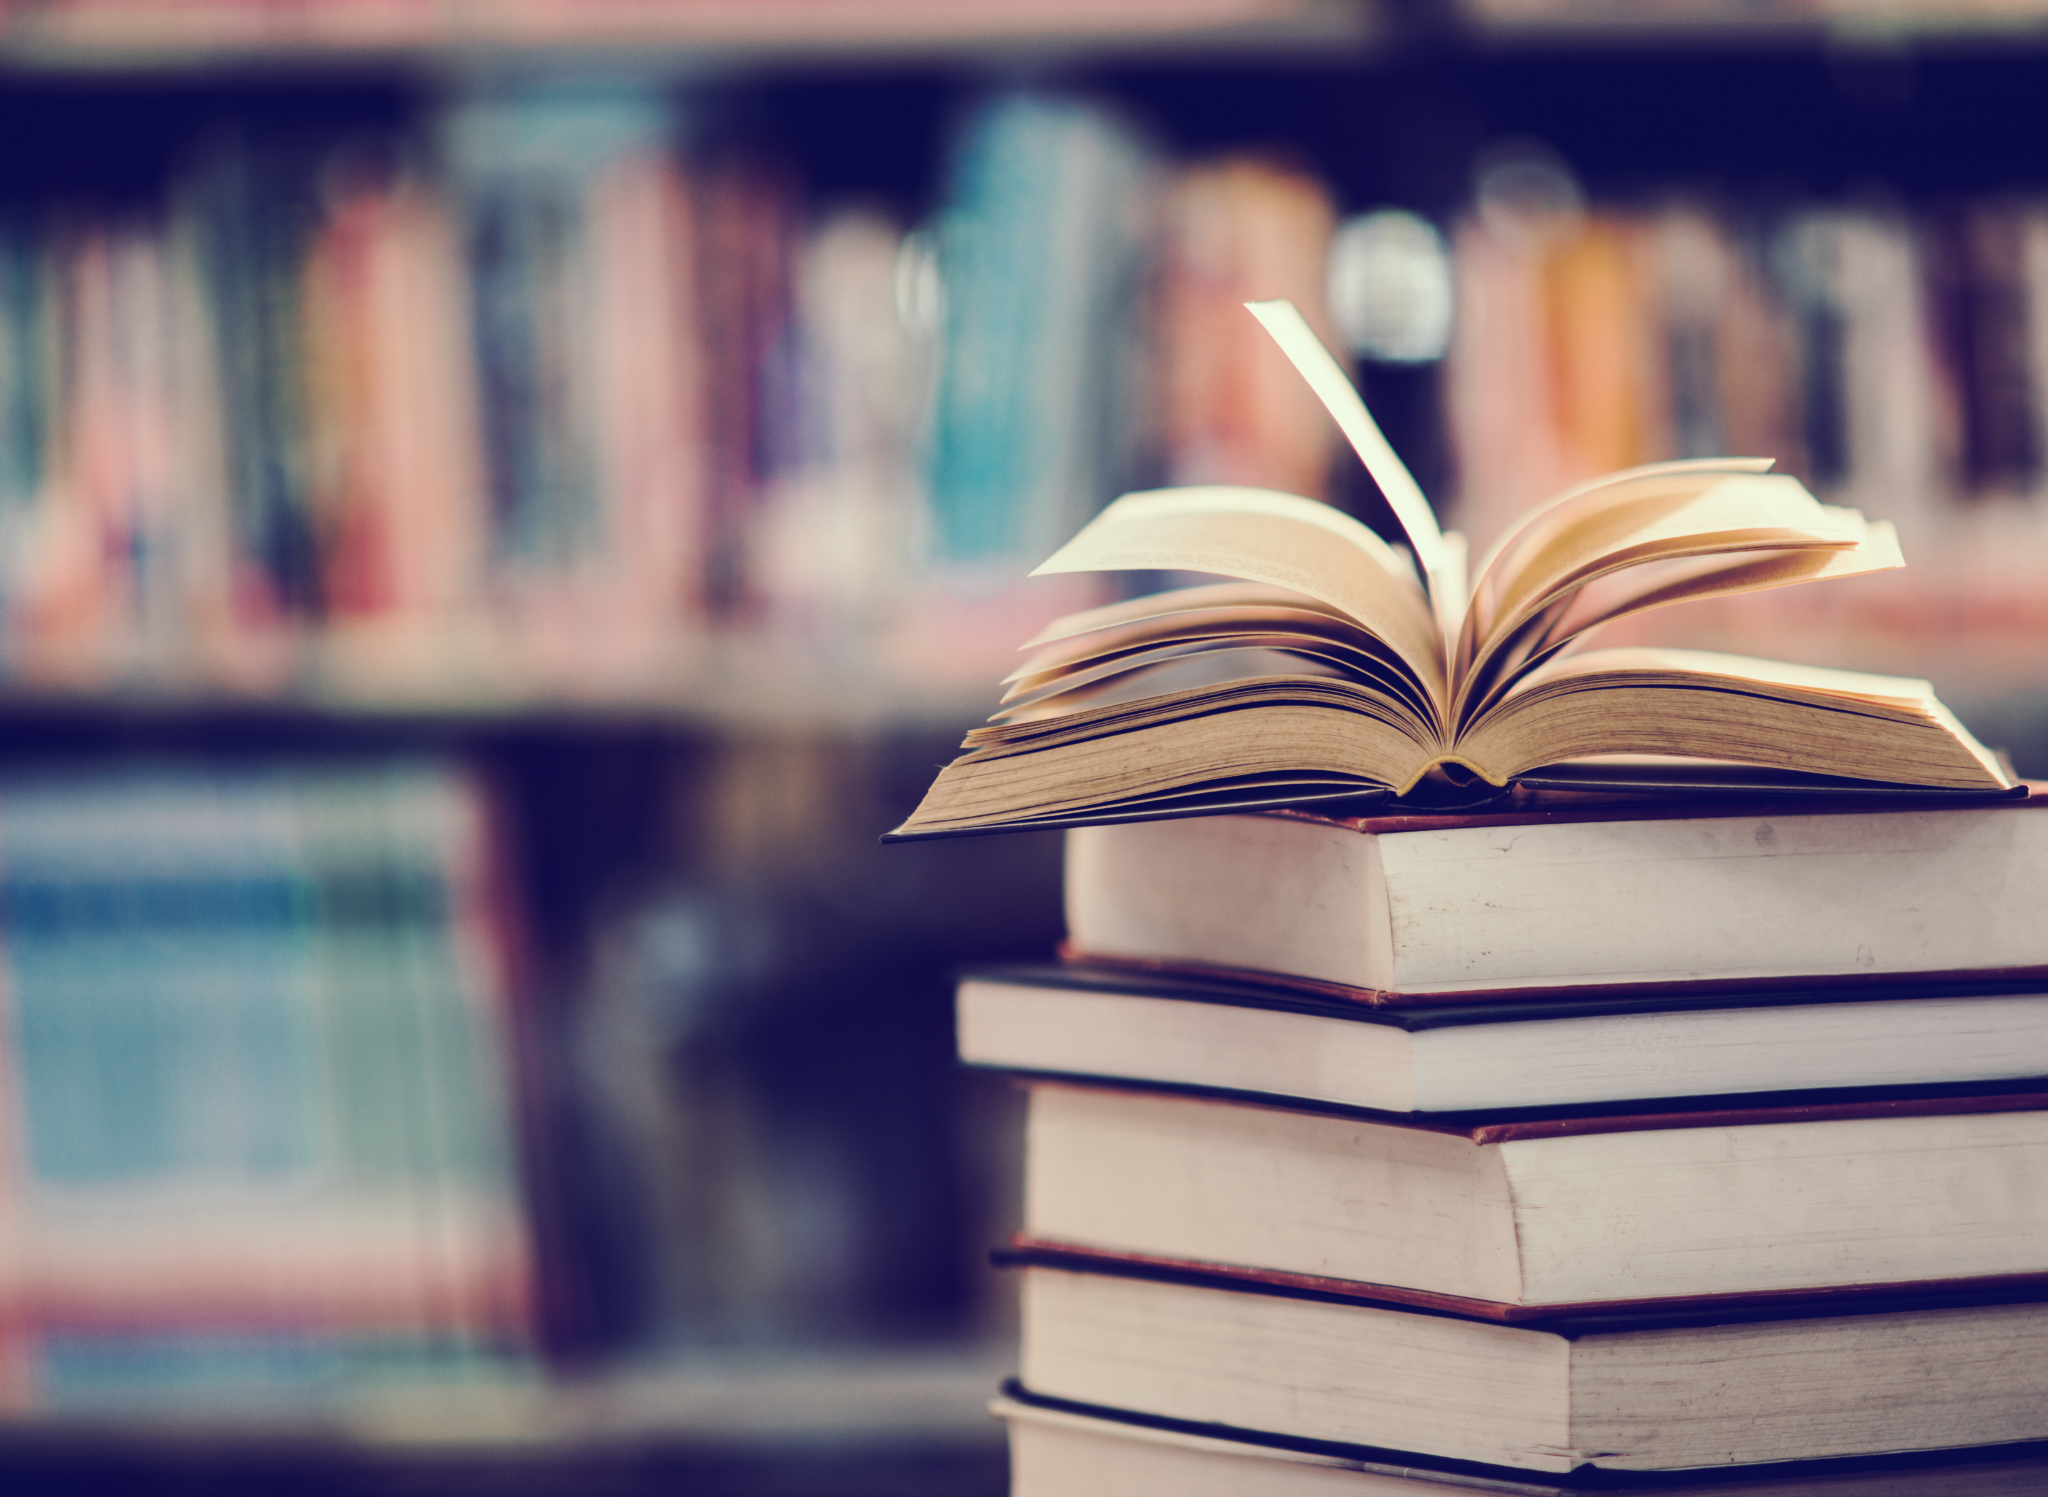 5 Sales Books EVERY Salesperson Should Read in 2022